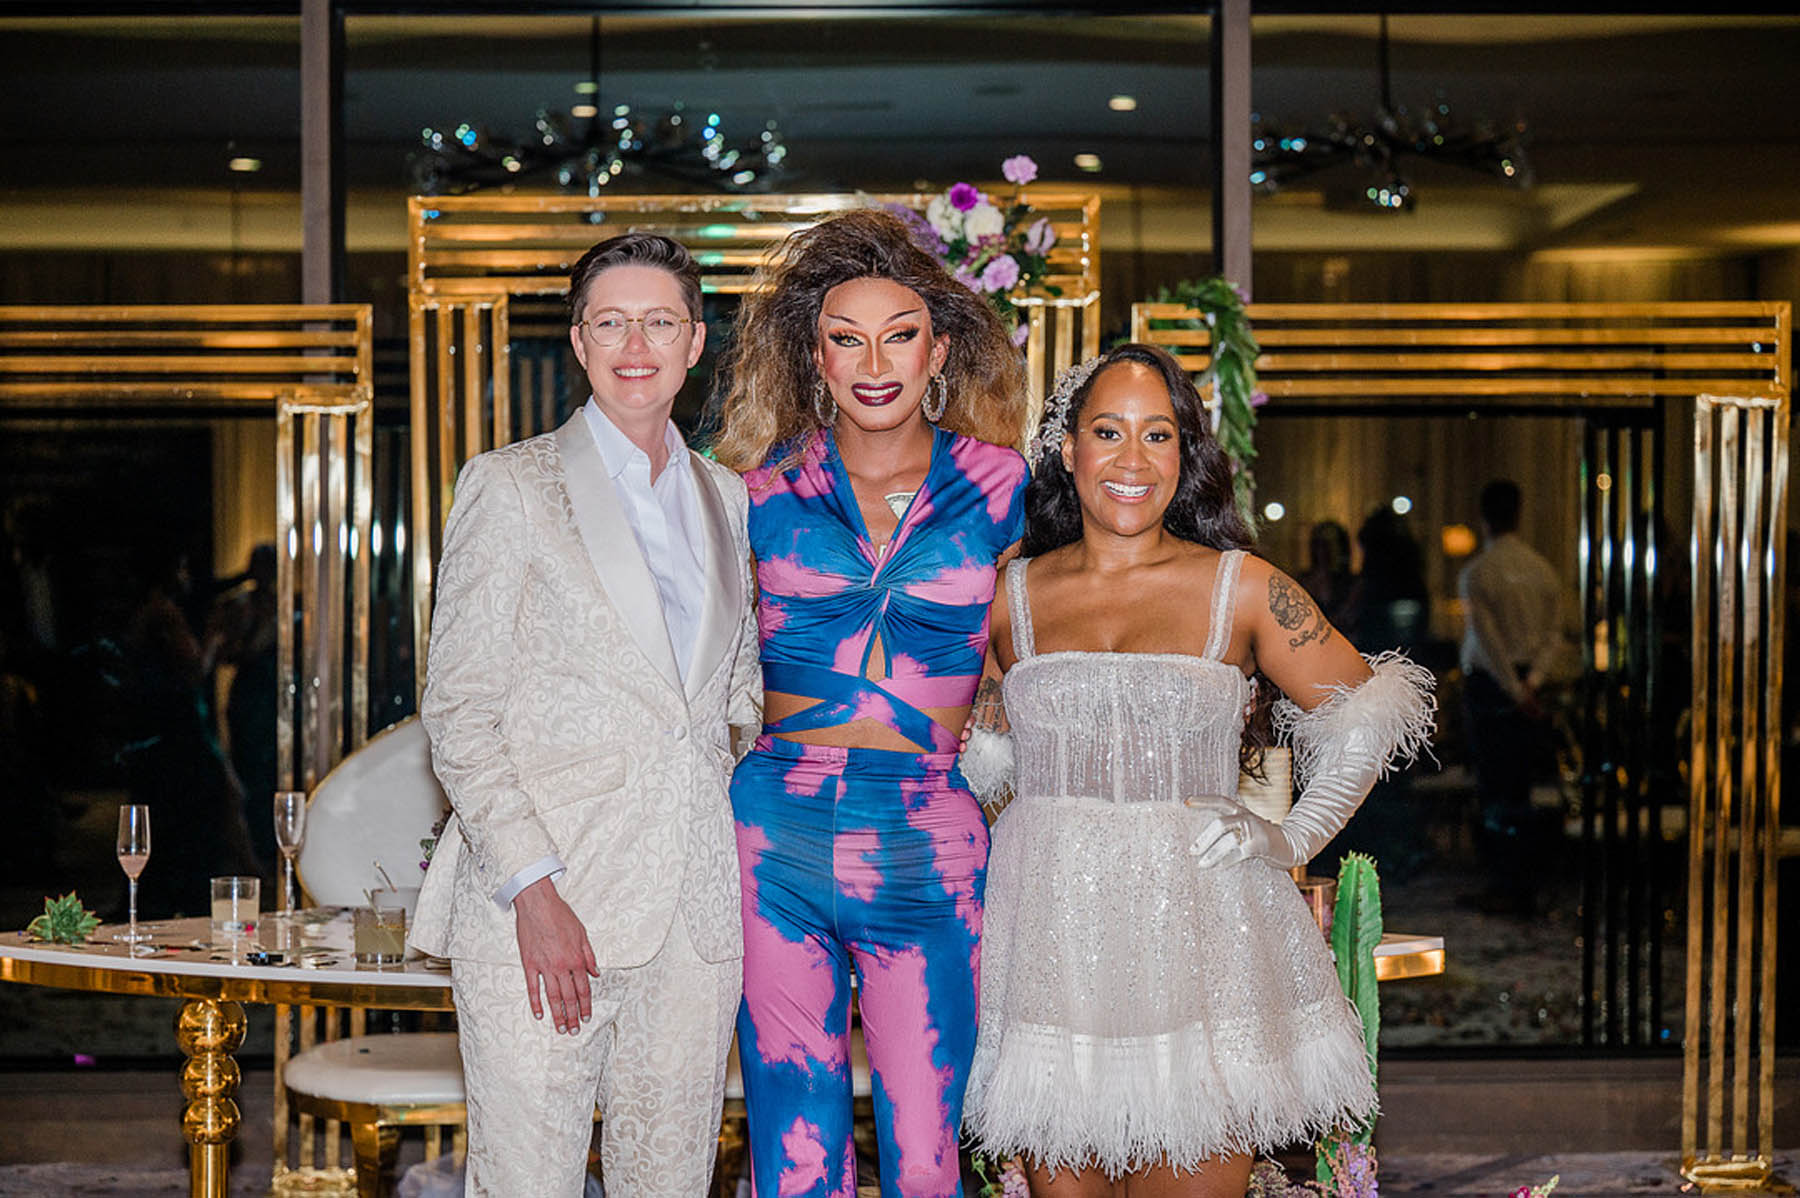 The marriers stand on either side of a drag queen, who is dressed in a blue and pink jumpsuit.